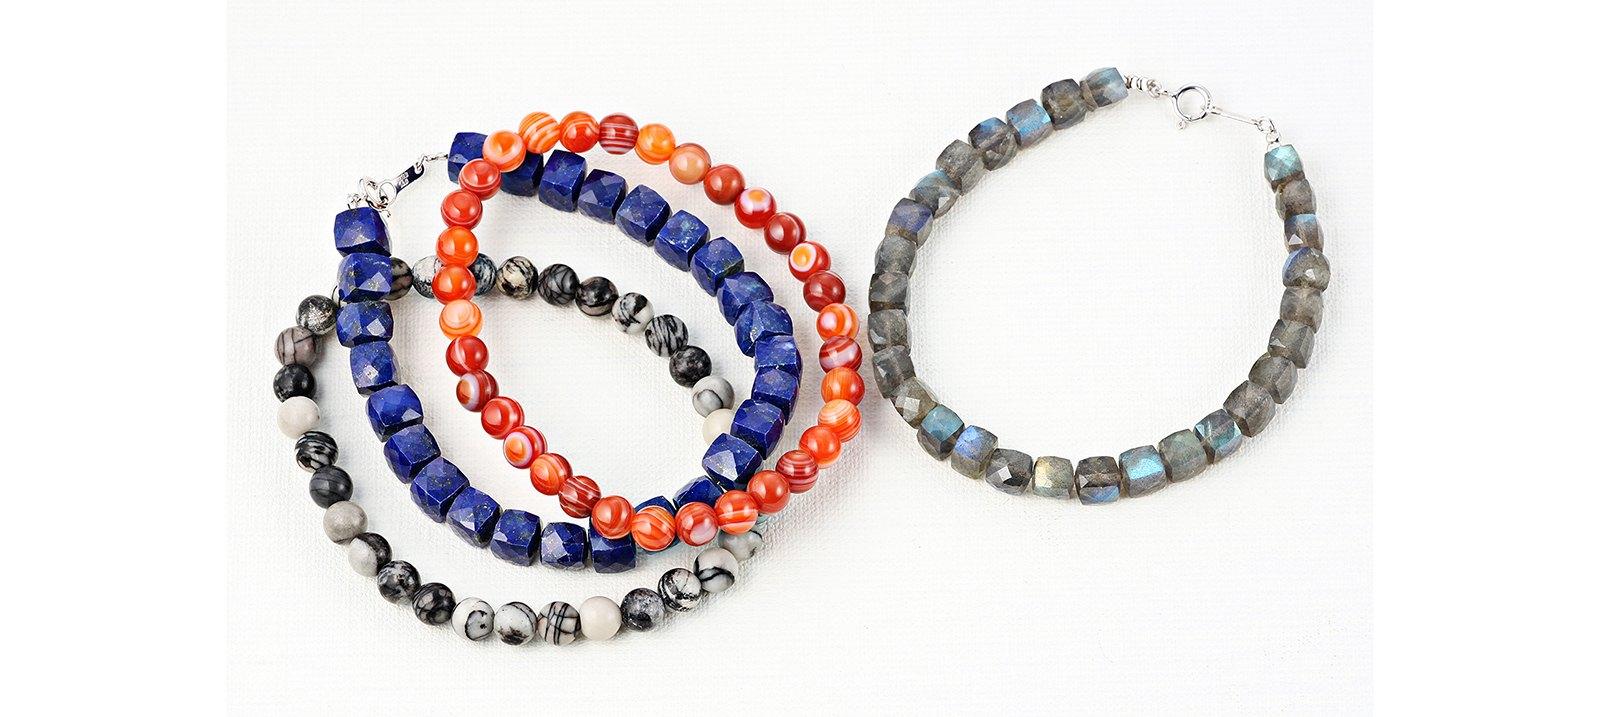 4 SEASONS JEWELRY：Color Stone Collection